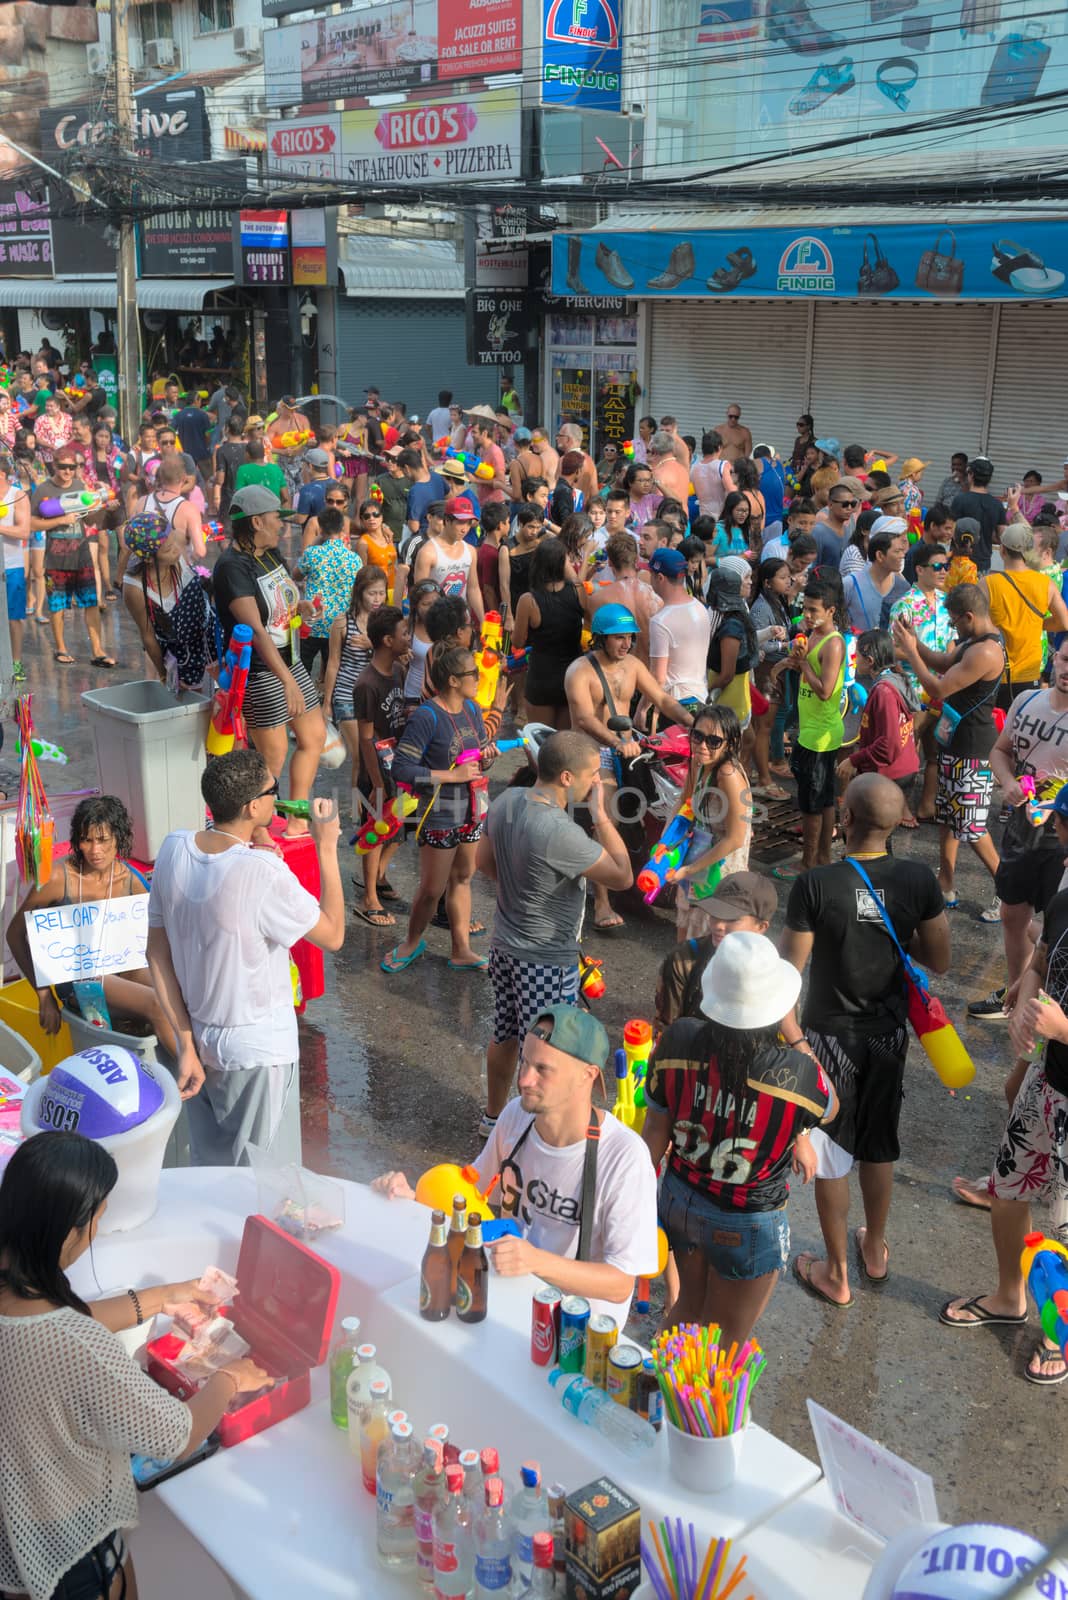 Phuket, Thailand - April 13, 2014: Tourists and residents celebrate Songkran Festival, the Thai New Year by splashing water to each others on Patong Bangla road. 